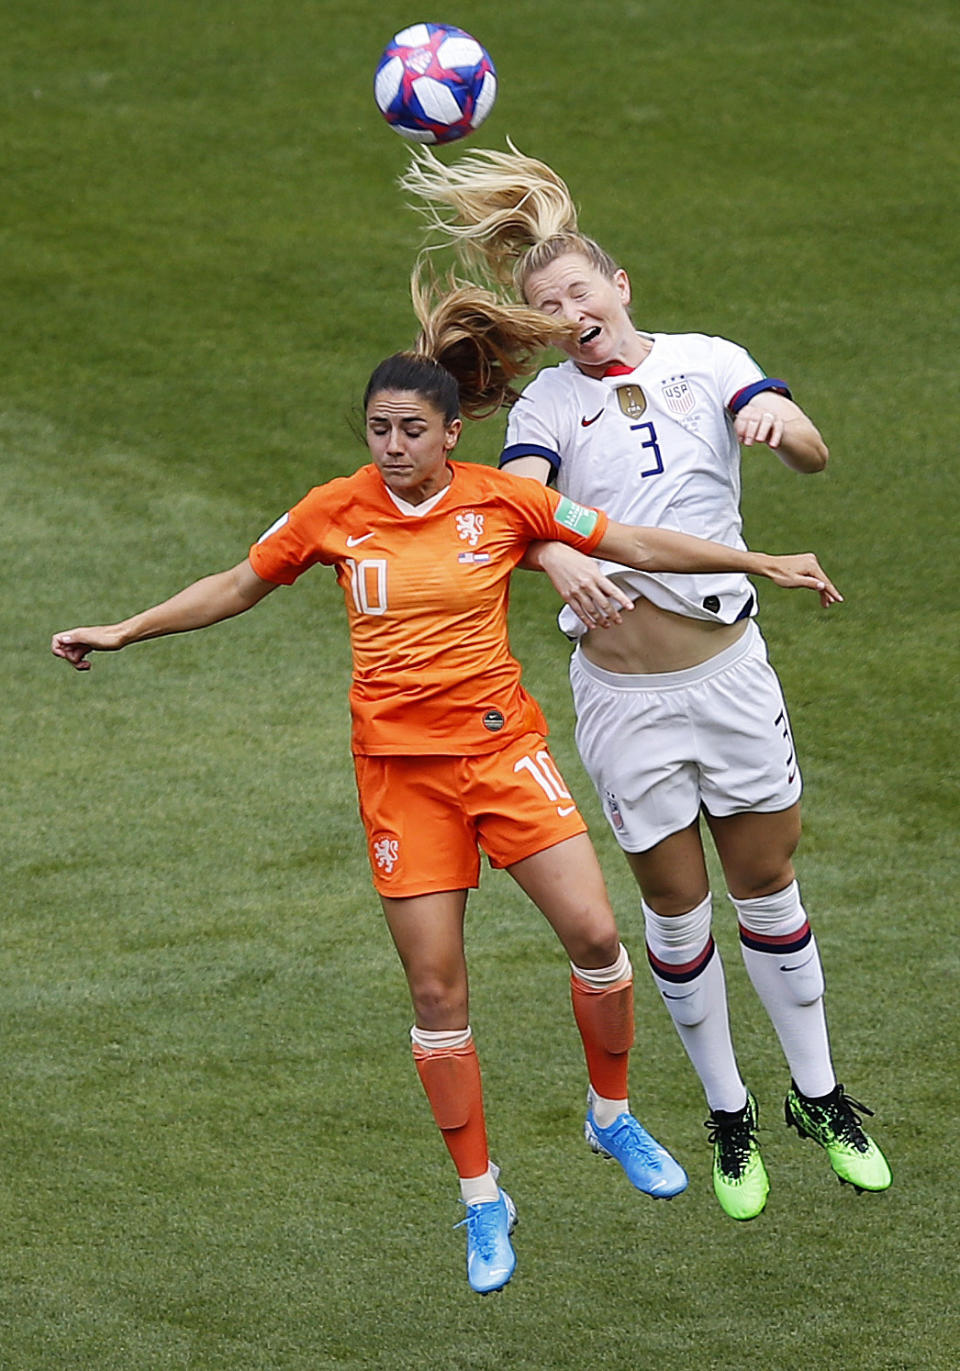 Netherlands' Danielle Van De Donk, left, and United States' Samantha Mewis challenge for the ball during the Women's World Cup final soccer match between US and The Netherlands at the Stade de Lyon in Decines, outside Lyon, France, Sunday, July 7, 2019. (AP Photo/Francois Mori)